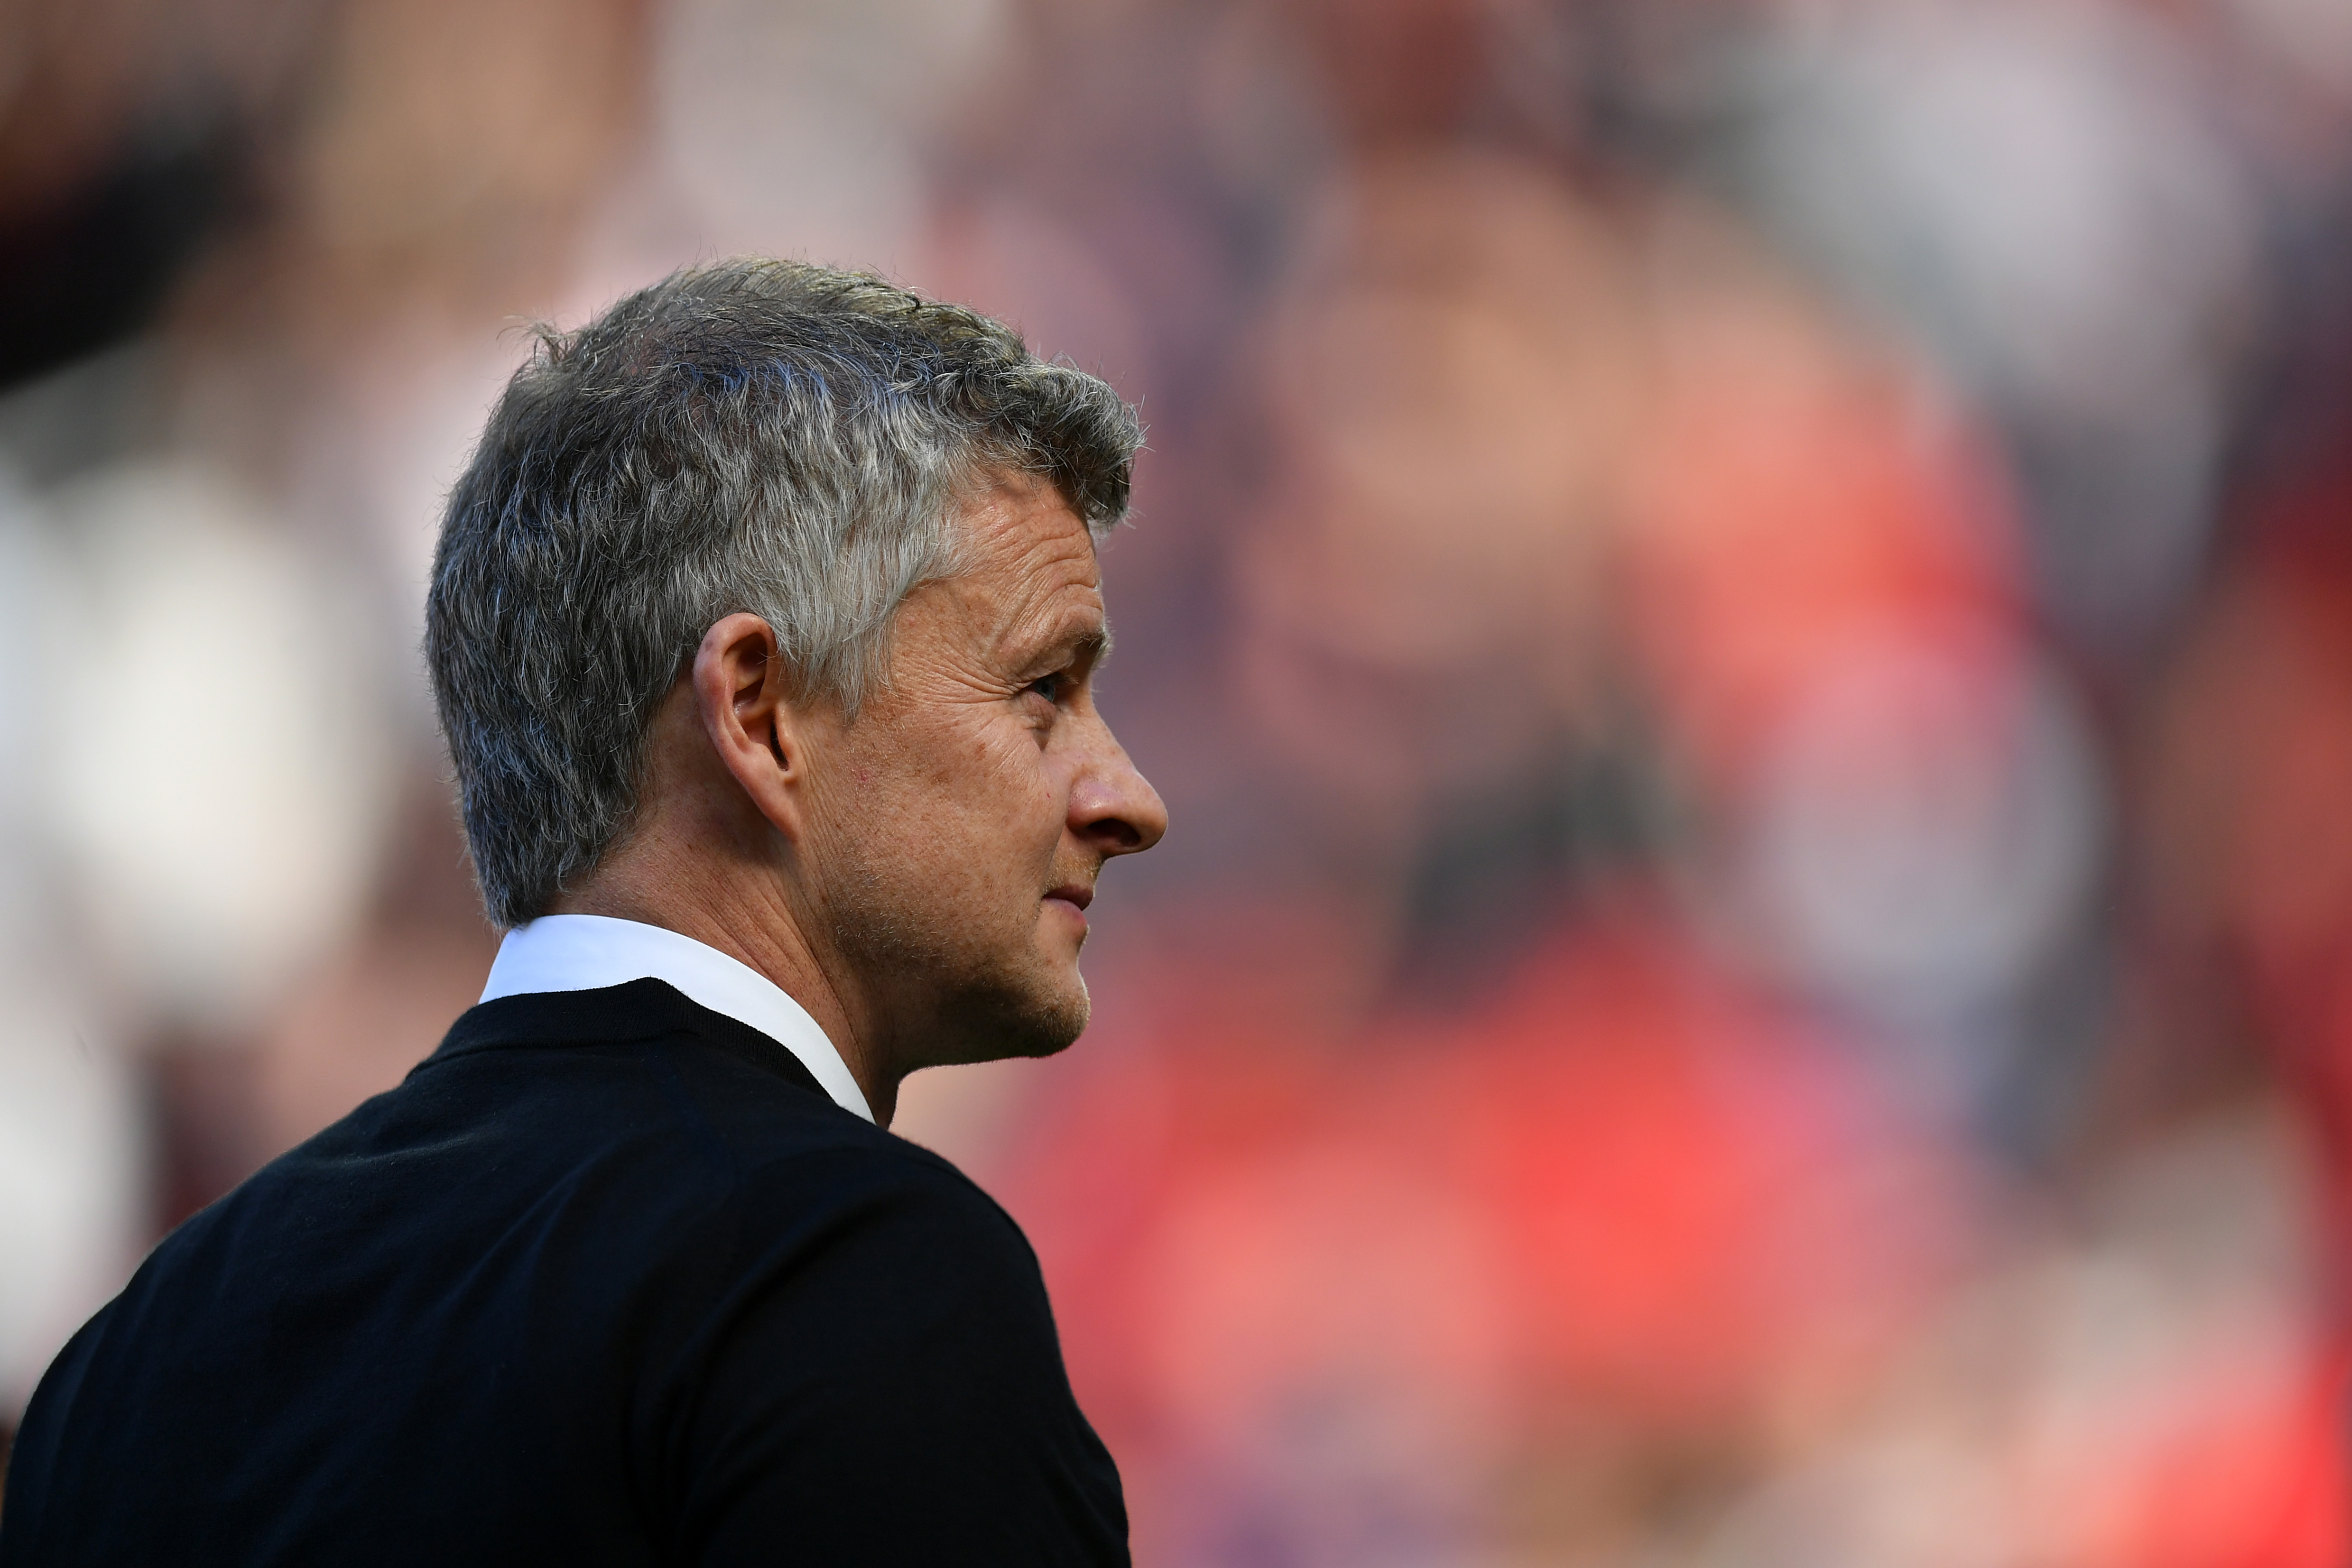 MANCHESTER, ENGLAND - MAY 12: Ole Gunnar Solskjaer, Manager of Manchester United looks on following his side's defeat during the Premier League match between Manchester United and Cardiff City at Old Trafford on May 12, 2019 in Manchester, United Kingdom. (Photo by Dan Mullan/Getty Images)